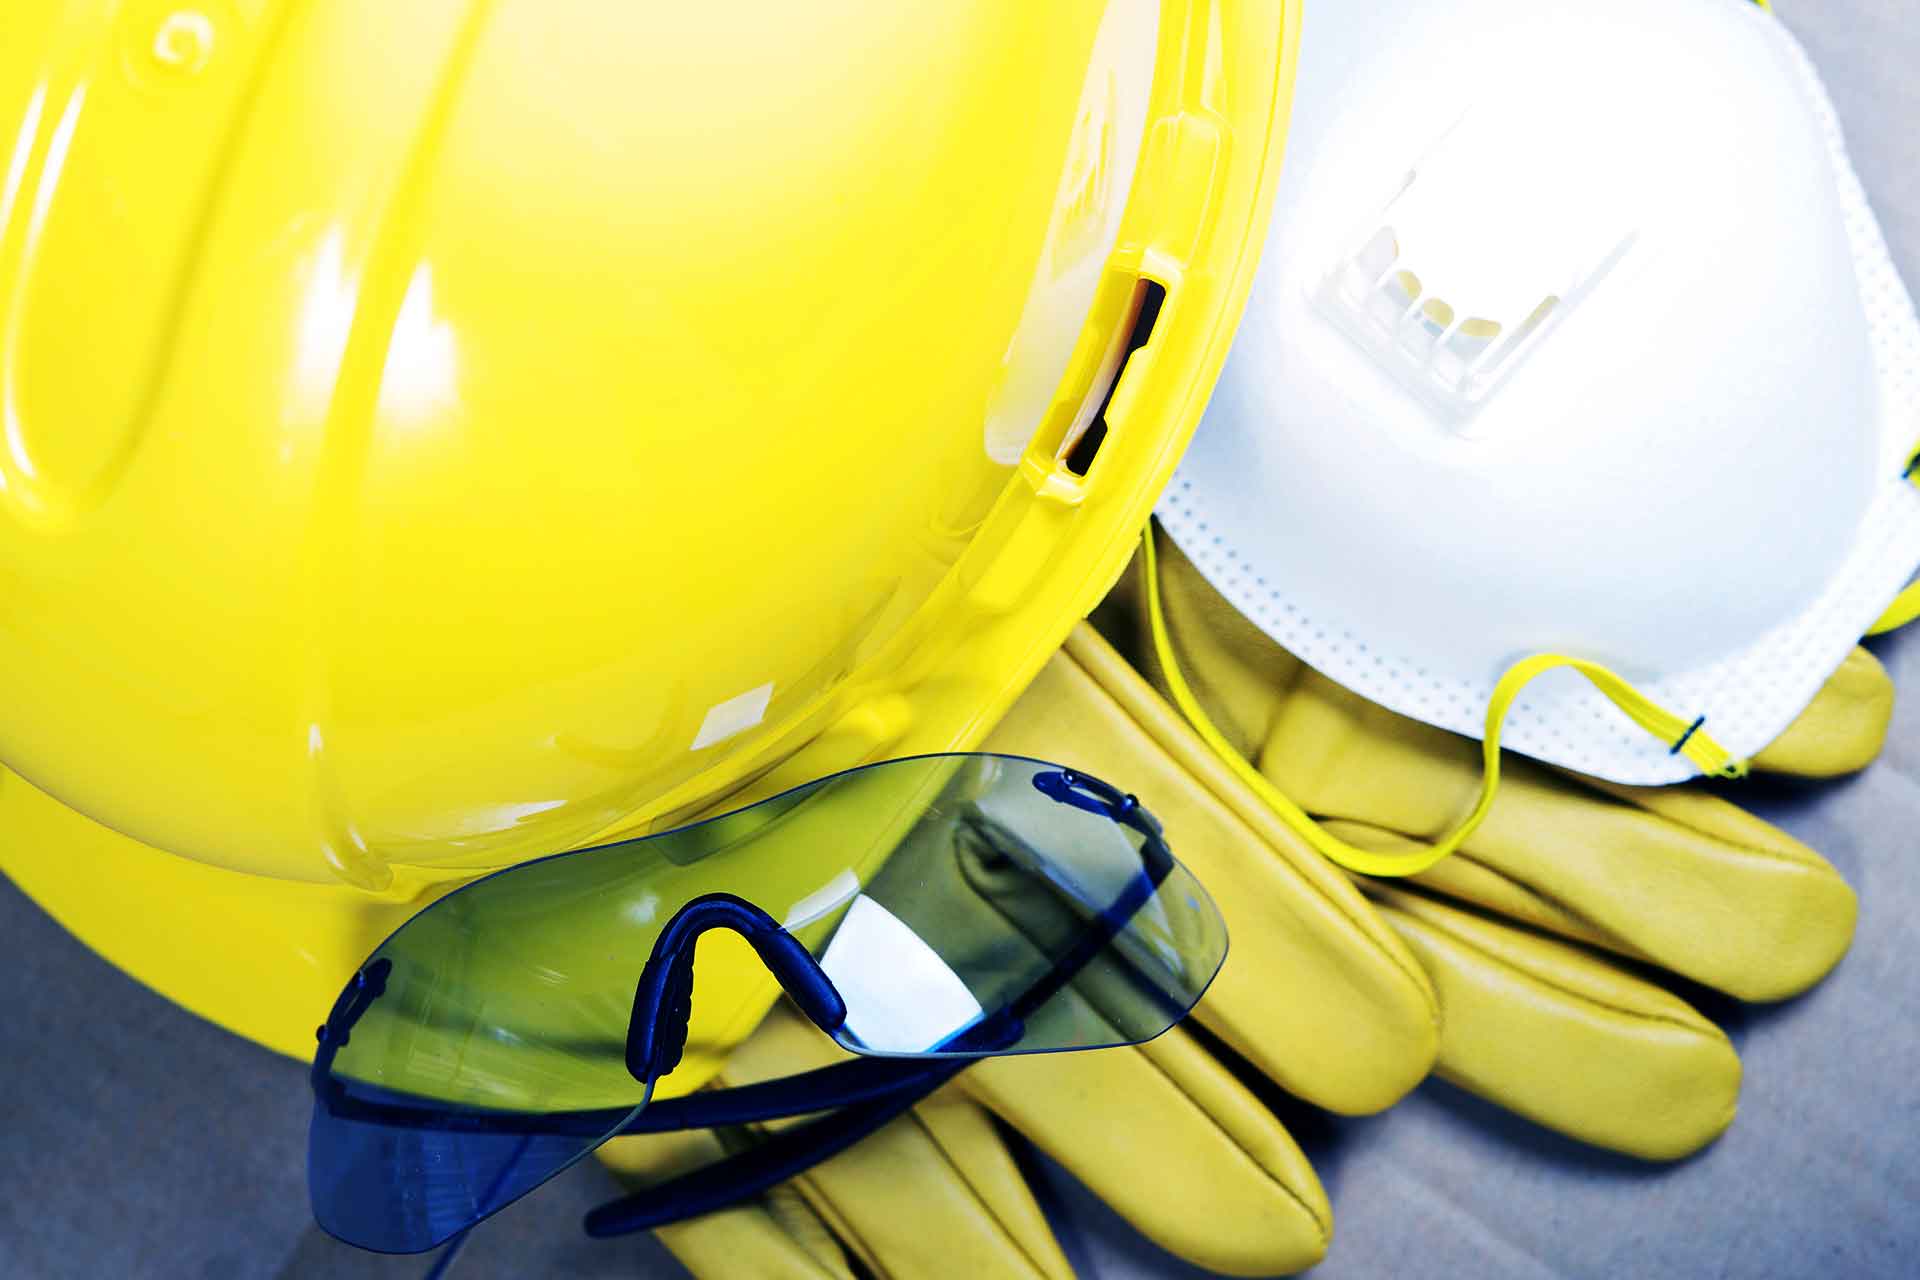 What protective equipment do you use?